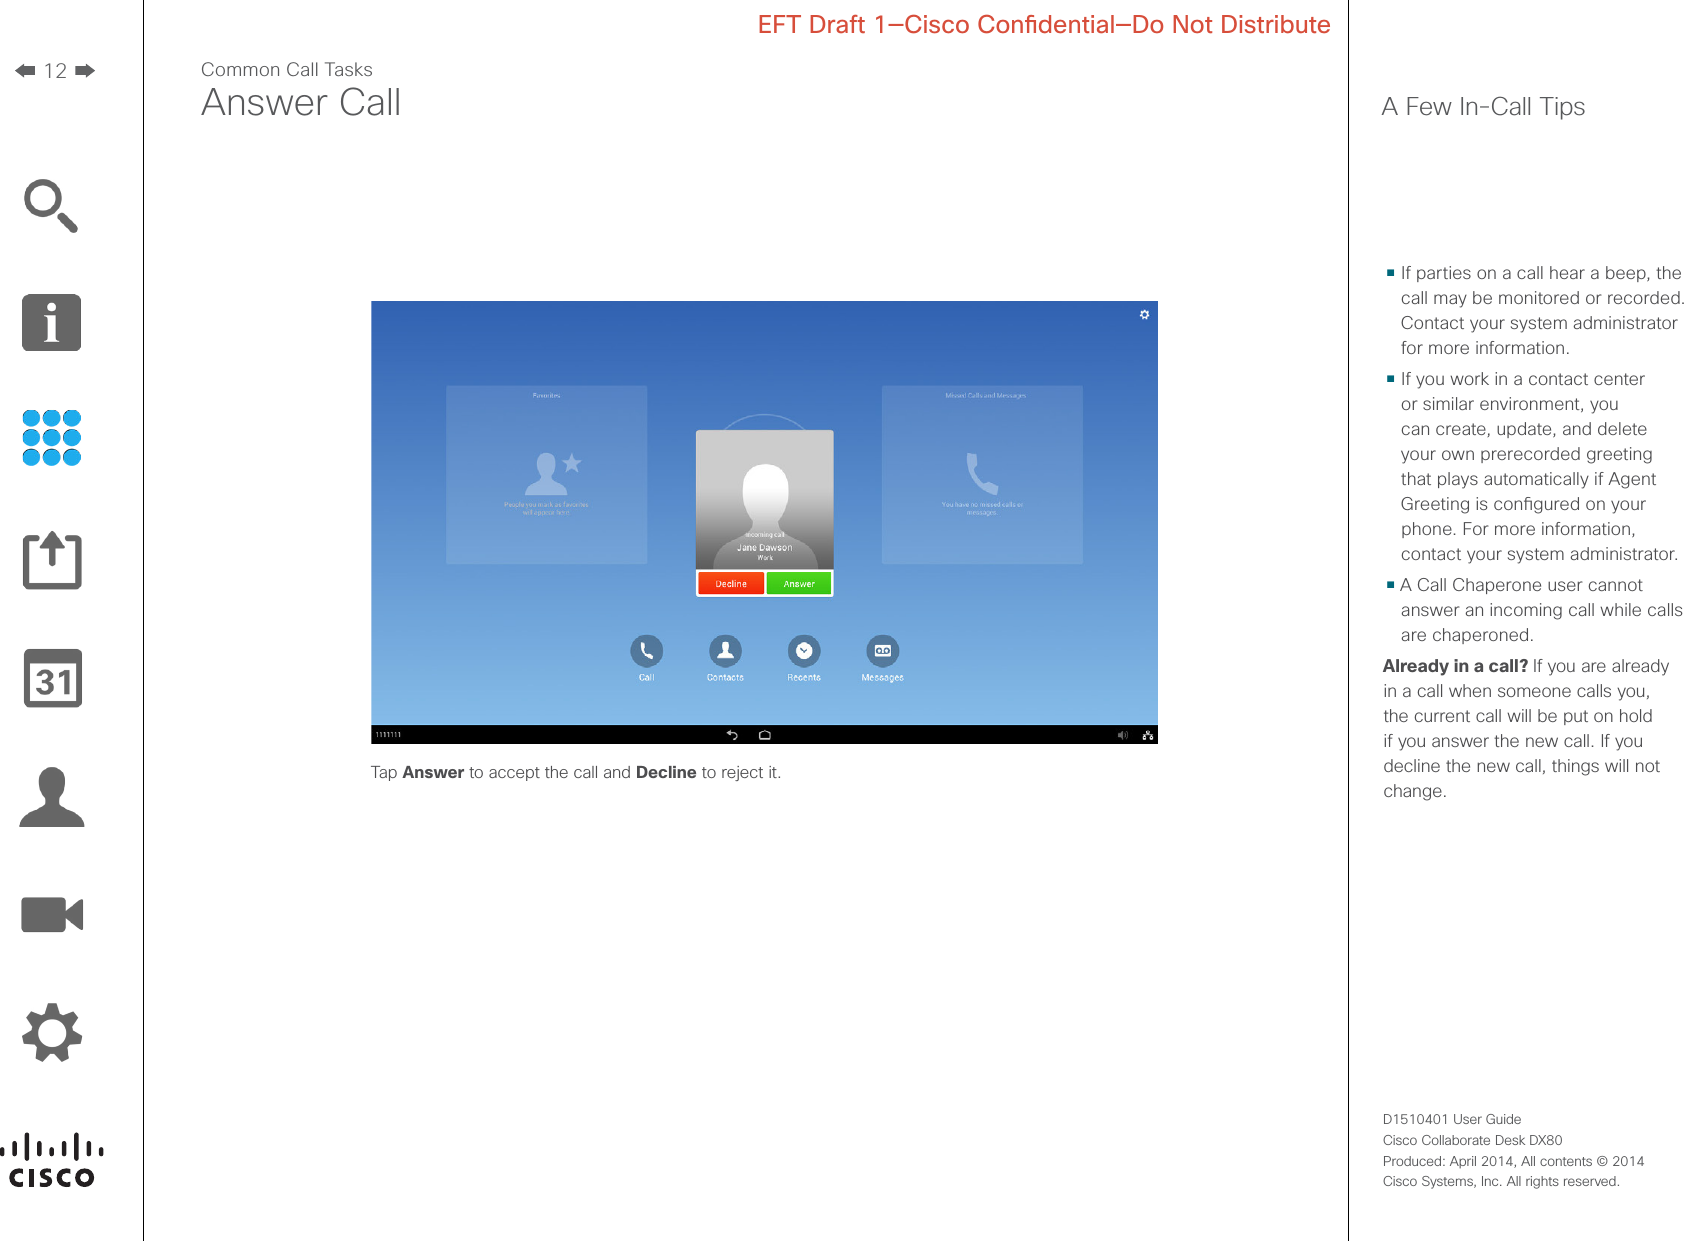 12D1510401 User Guide  Cisco Collaborate Desk DX80Produced: April 2014, All contents © 2014  Cisco Systems, Inc. All rights reserved. EFT Draft 1—Cisco Condential—Do Not DistributeCommon Call TasksAnswer Call A Few In-Call Tips• If parties on a call hear a beep, the call may be monitored or recorded. Contact your system administrator for more information.• If you work in a contact center or similar environment, you can create, update, and delete your own prerecorded greeting that plays automatically if Agent Greeting is congured on your phone. For more information, contact your system administrator.• A Call Chaperone user cannot answer an incoming call while calls are chaperoned.Already in a call? If you are already in a call when someone calls you, the current call will be put on hold if you answer the new call. If you decline the new call, things will not change.Tap Answer to accept the call and Decline to reject it.